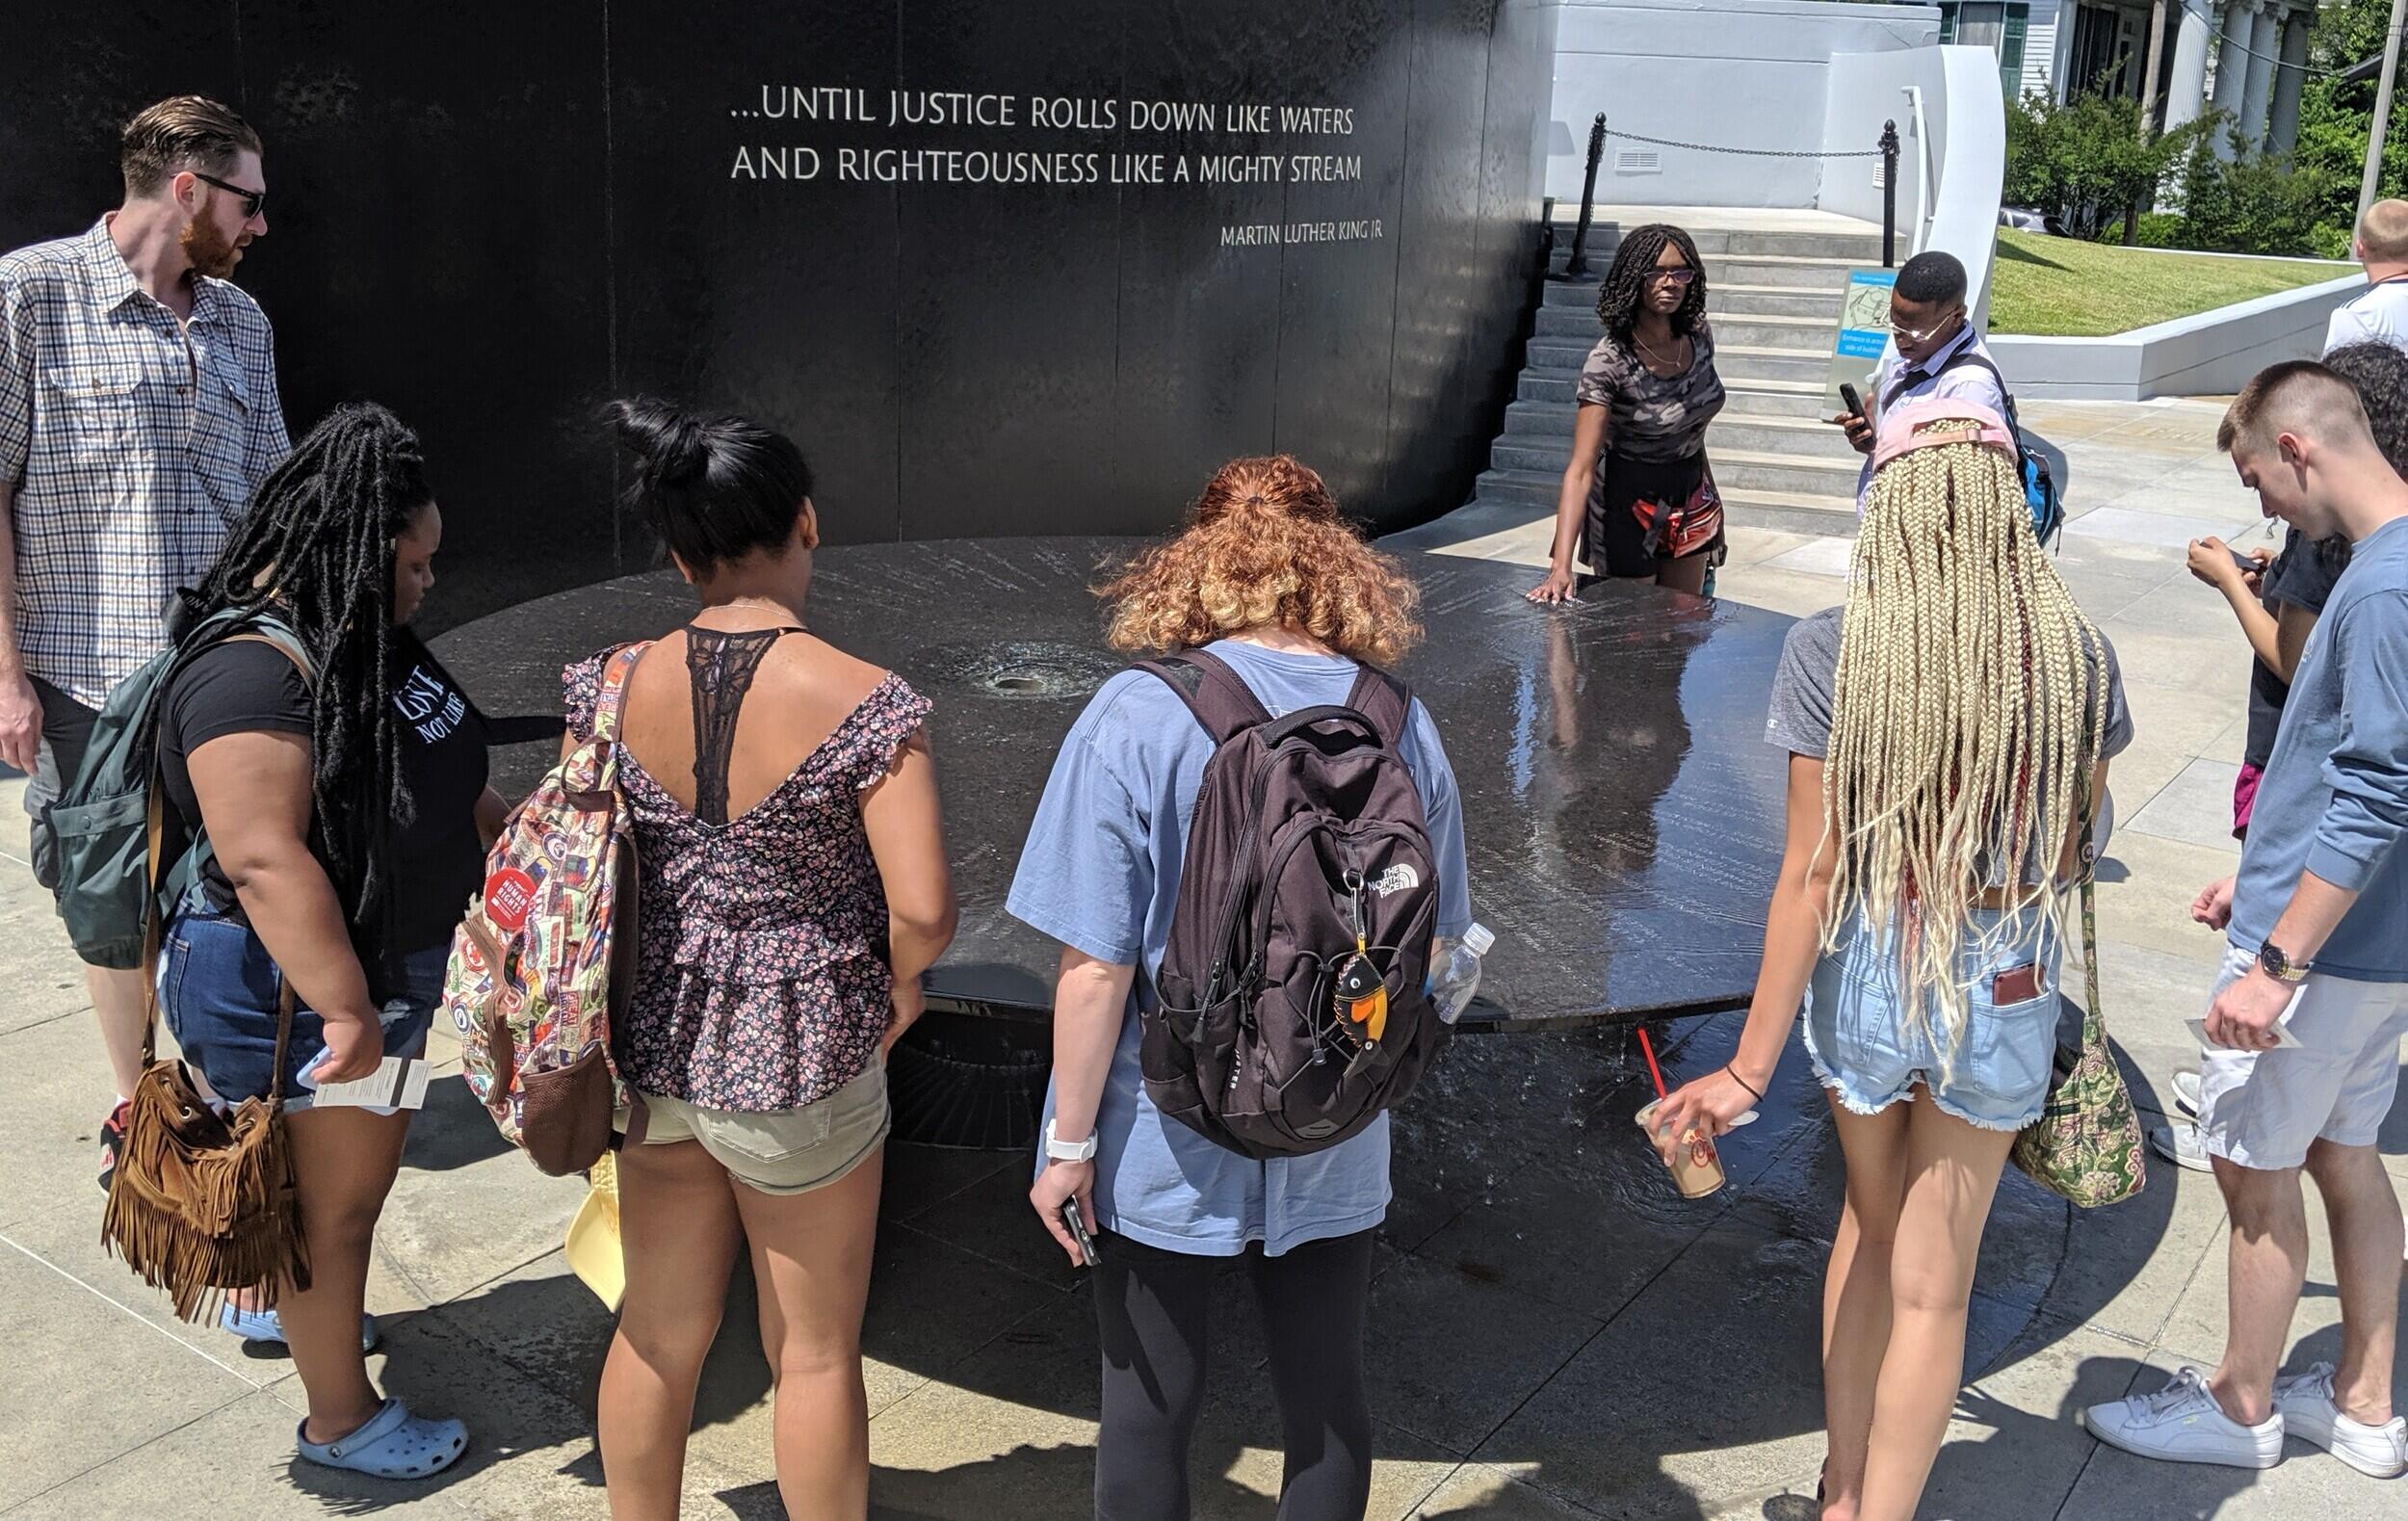 A group of students surrounding a circular granite monument. A quote is listed on the wall behind the monument.